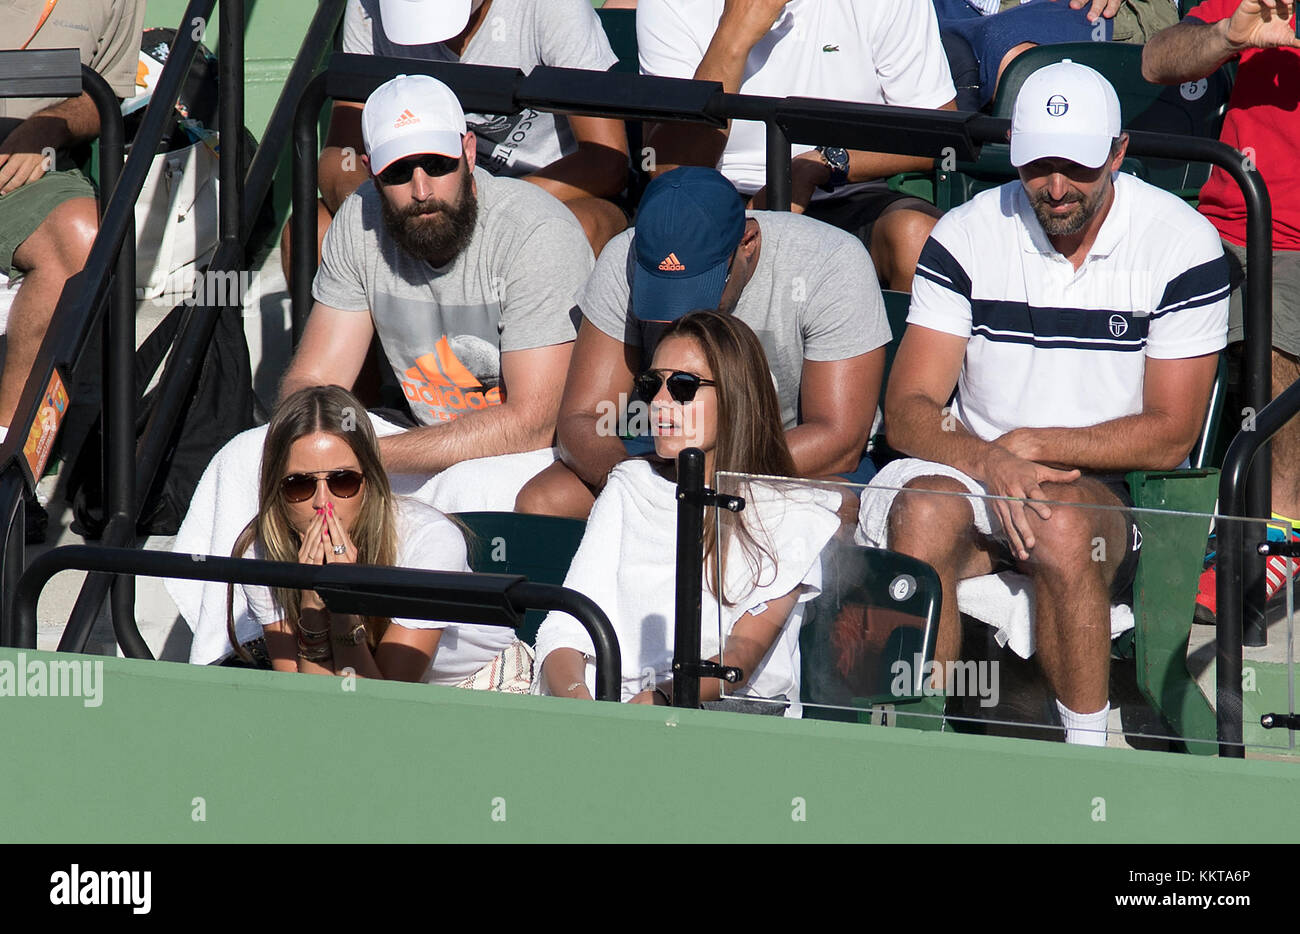 KEY BISCAYNE, FL - MARCH 30: Roger Federer Box on day 11 of the Miami Open at Crandon Park Tennis Center on March 30, 2017 in Key Biscayne, Florida.    People:  Roger Federer Box Stock Photo